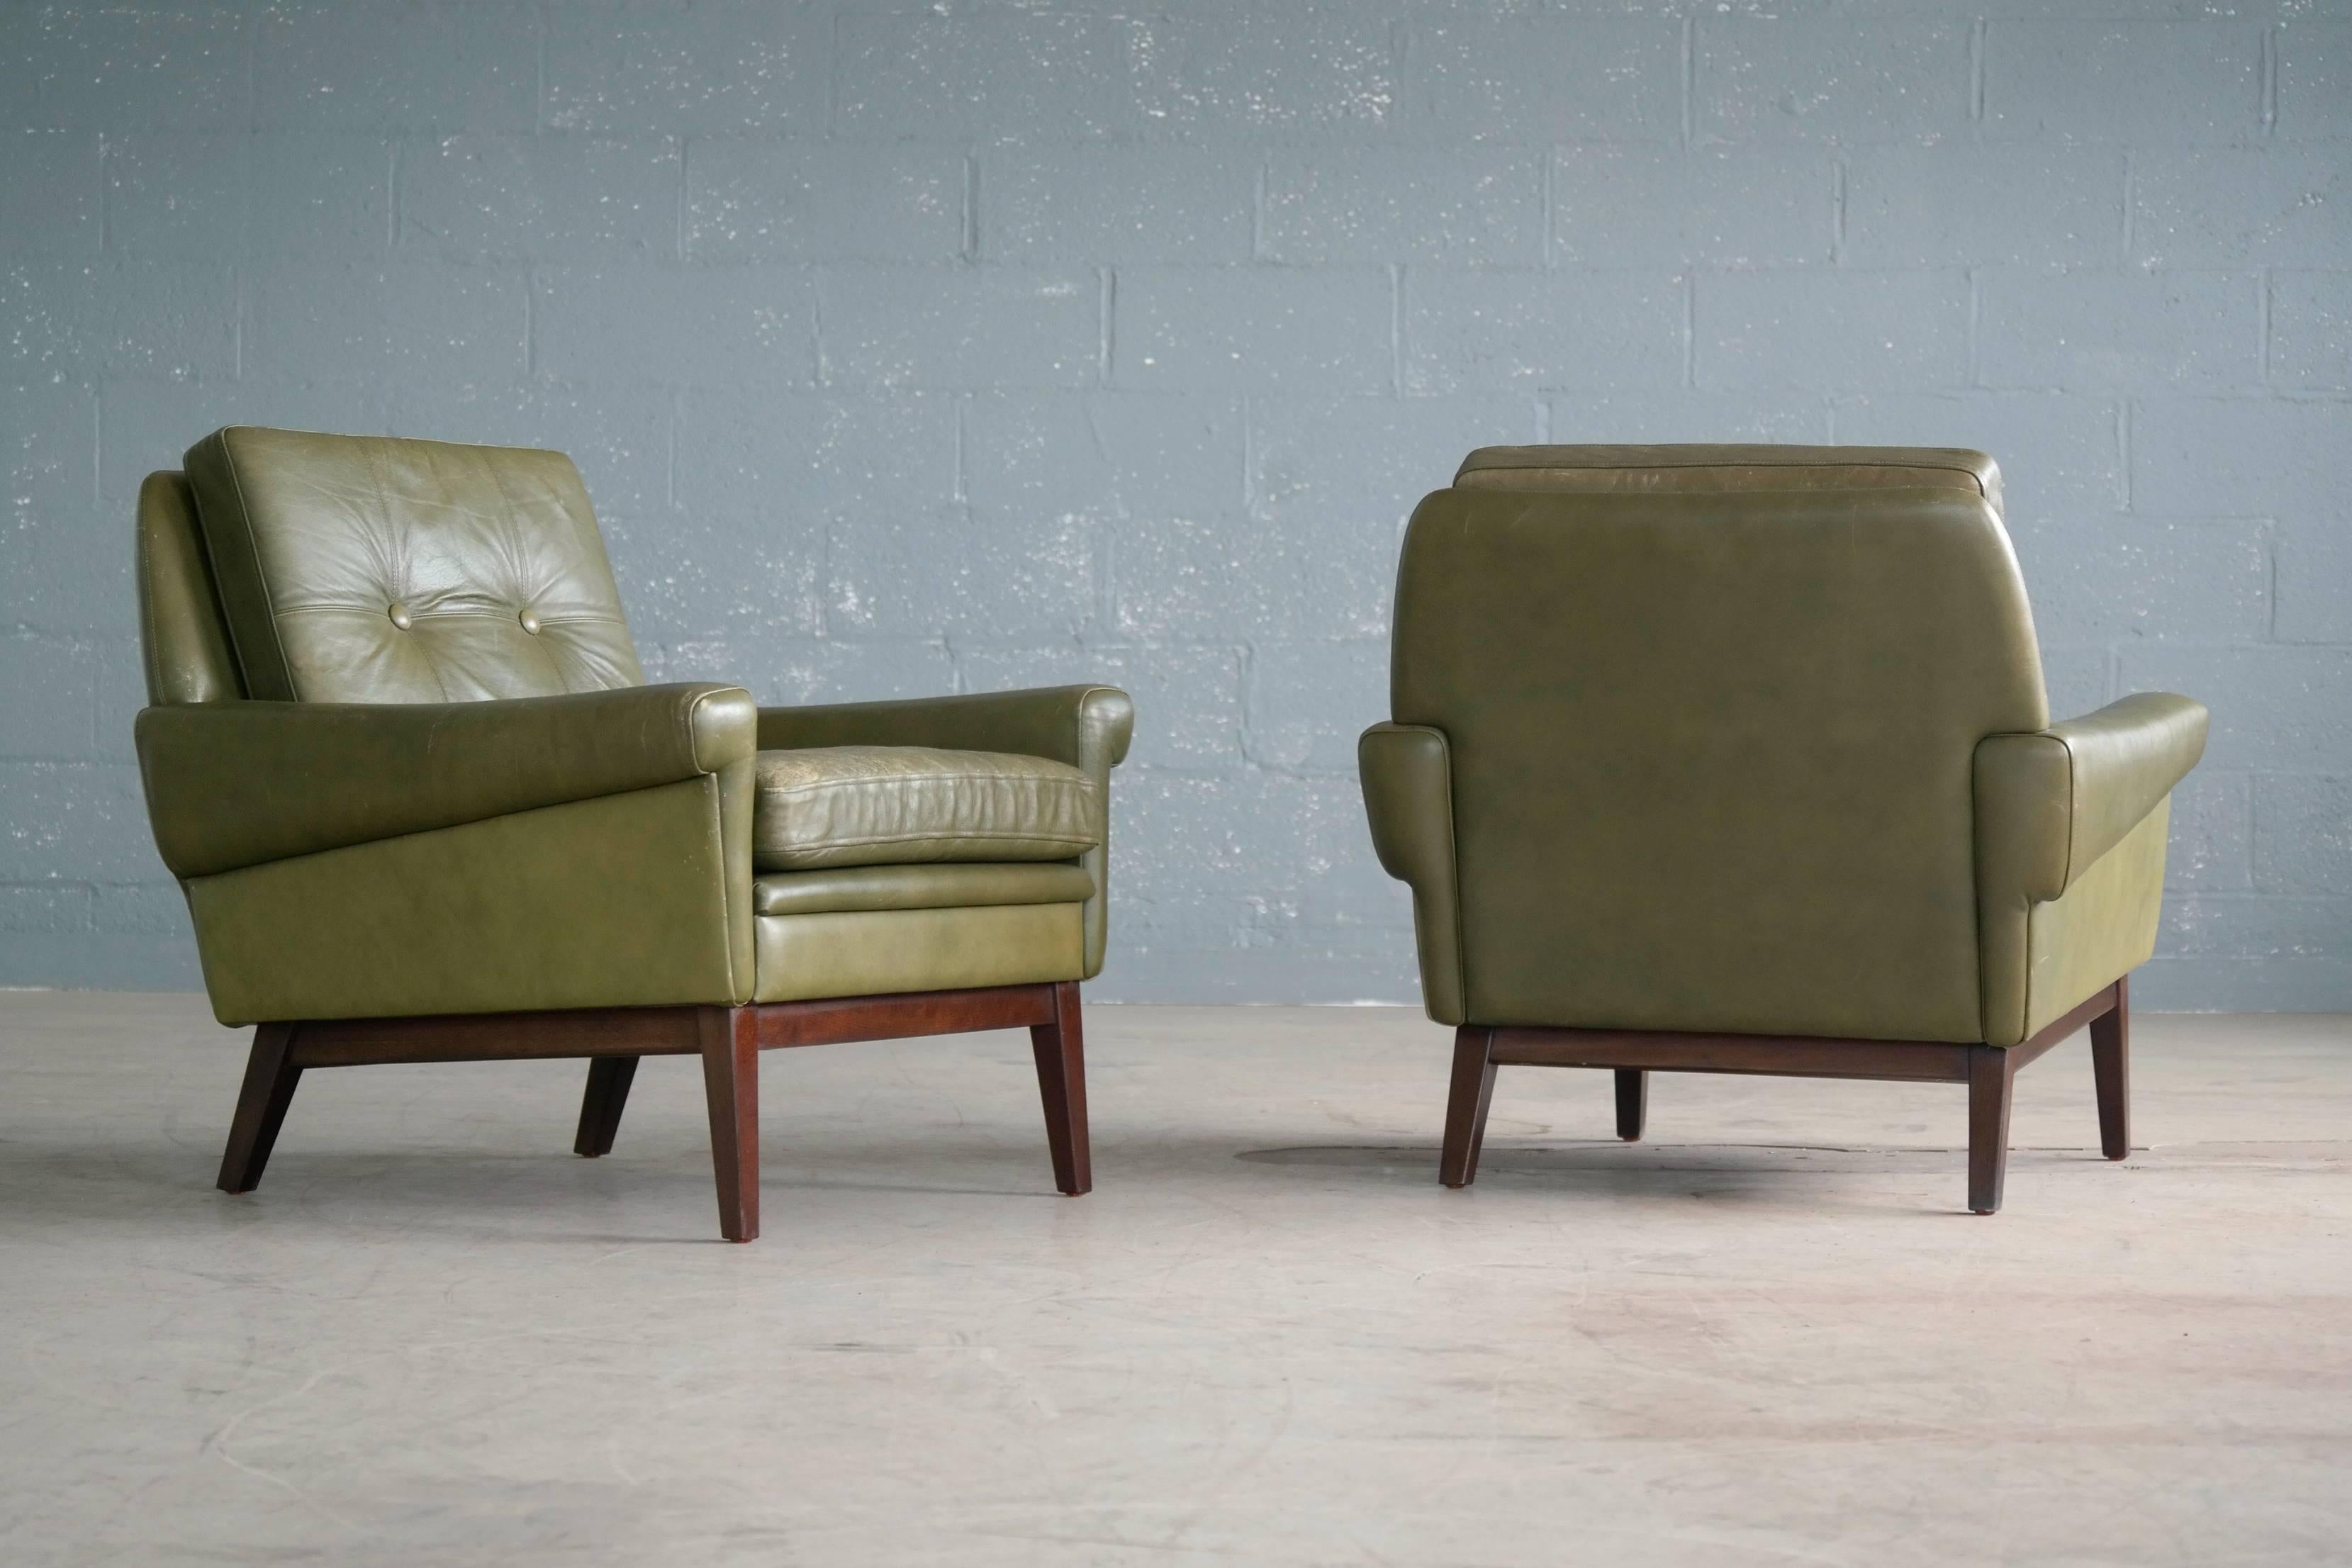 Super stylish pair of 1960s lounge chairs in supple dark green leather by Svend Skipper. Very sought after iconic Skipper design with loose cushion on rosewood stained bases of beech. Perfectly worn and with great patina and little color variation